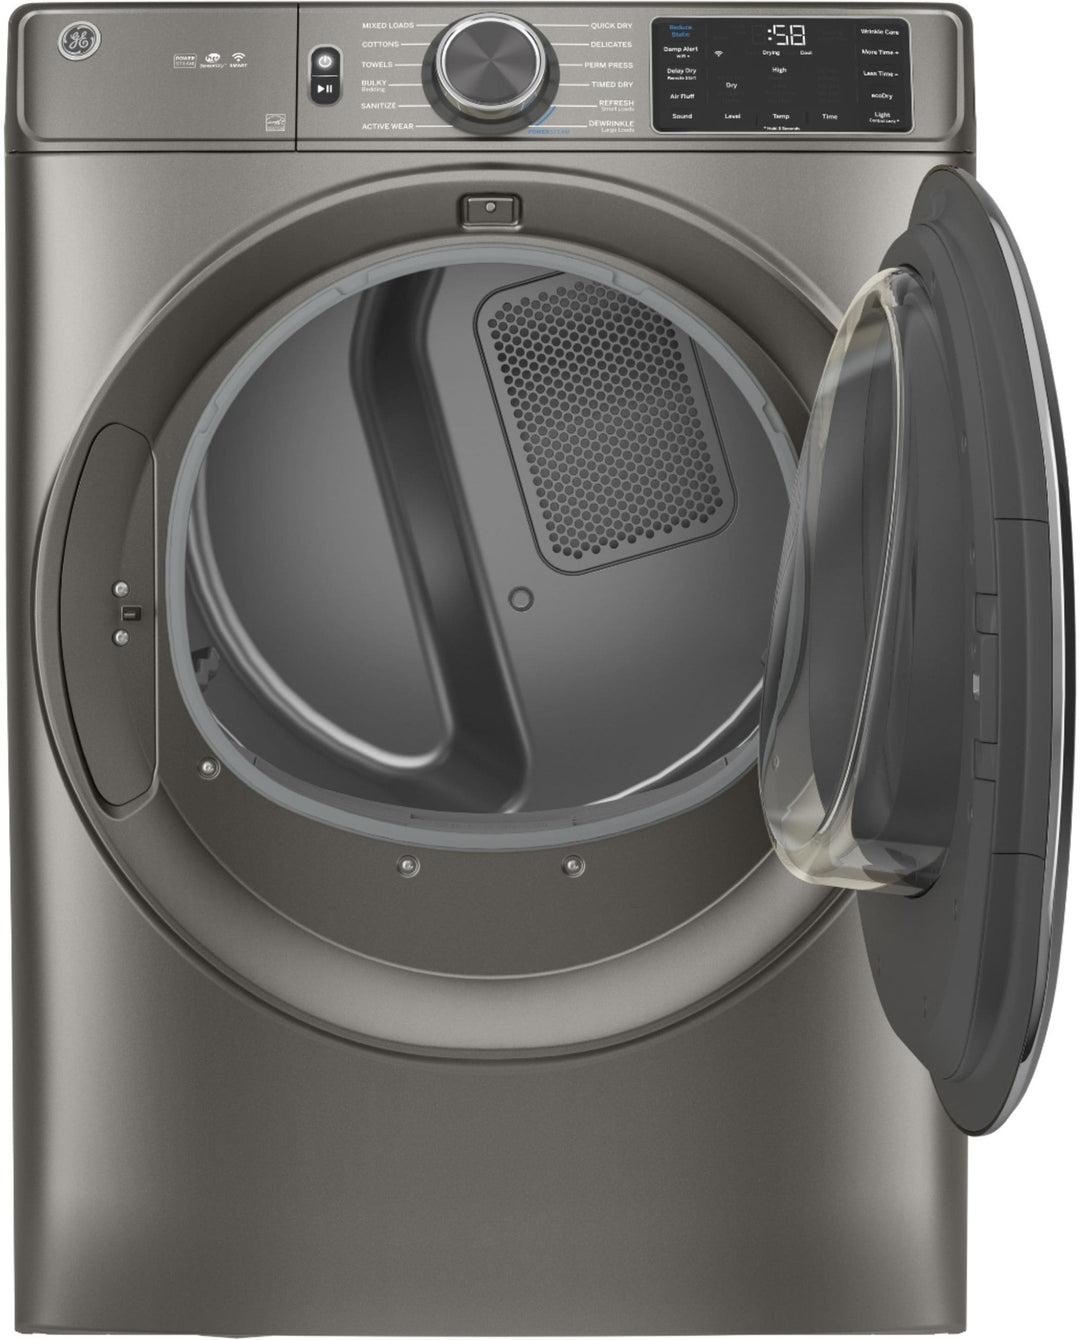 GE - 7.8 Cu. Ft. 12-Cycle Electric Dryer with Steam - Satin nickel_8